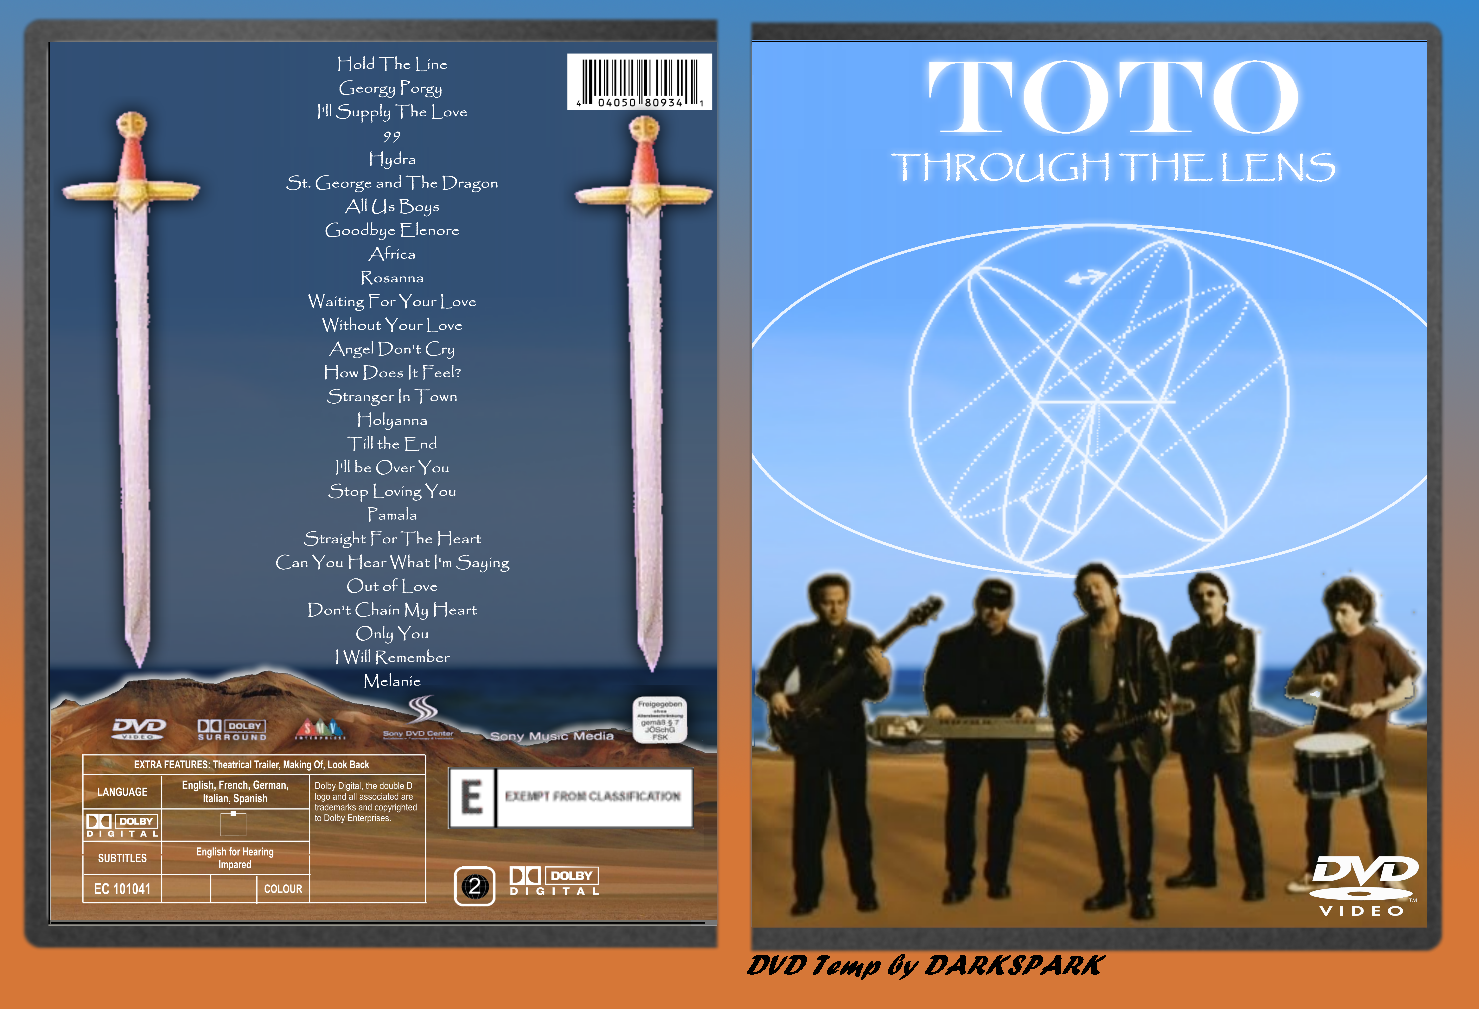 Toto - Through The Lens Video Compliation box cover